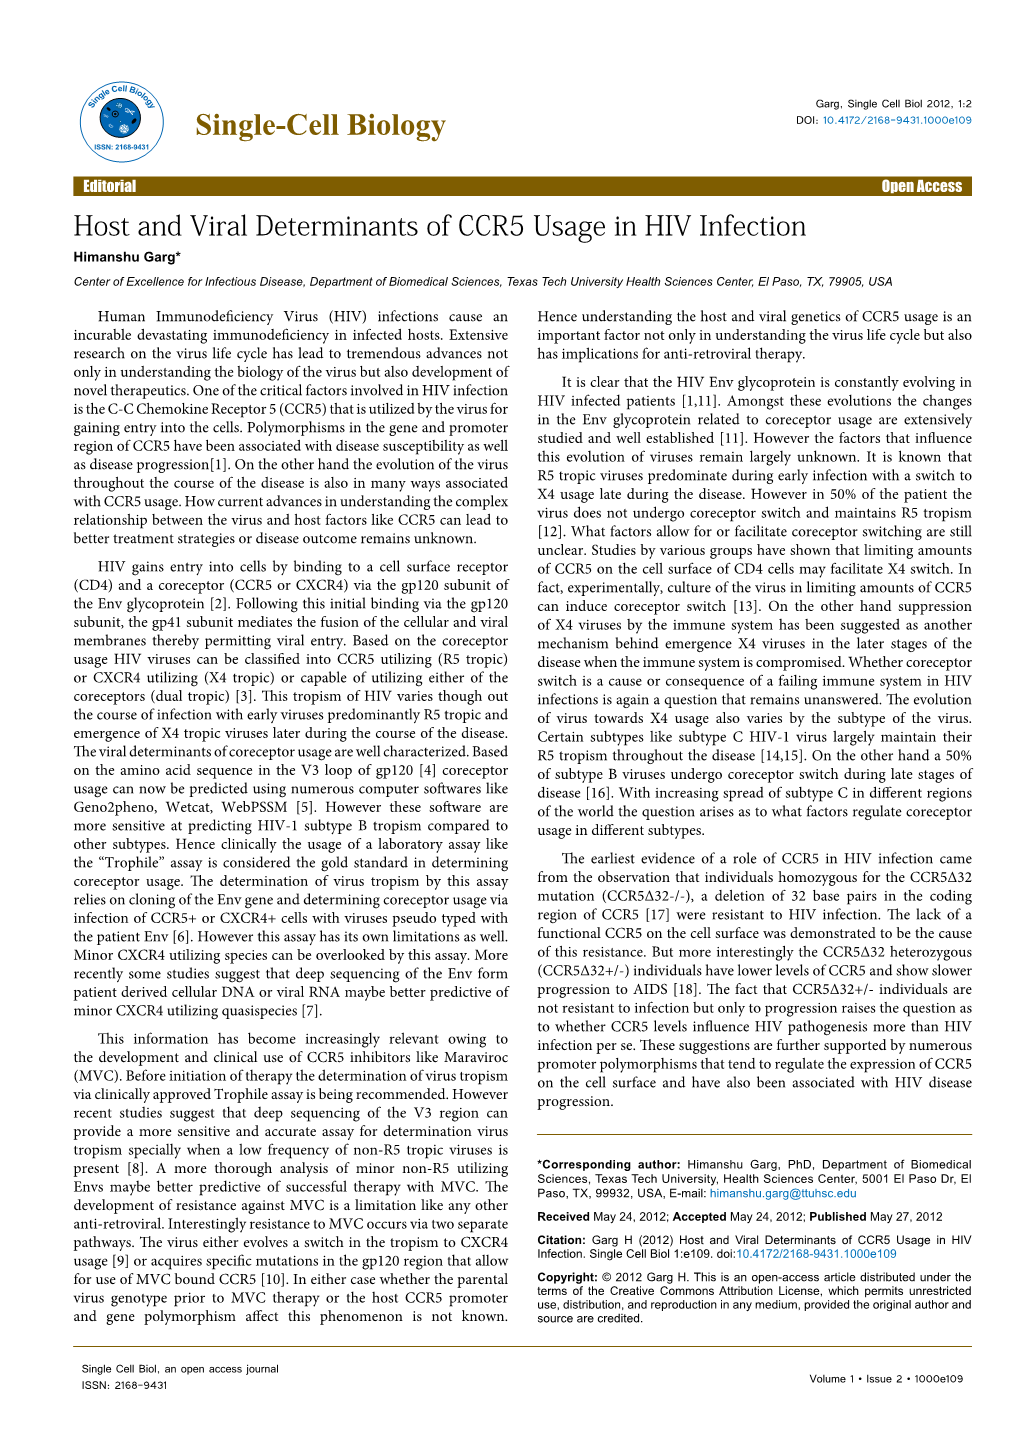 Host and Viral Determinants of CCR5 Usage in HIV Infection